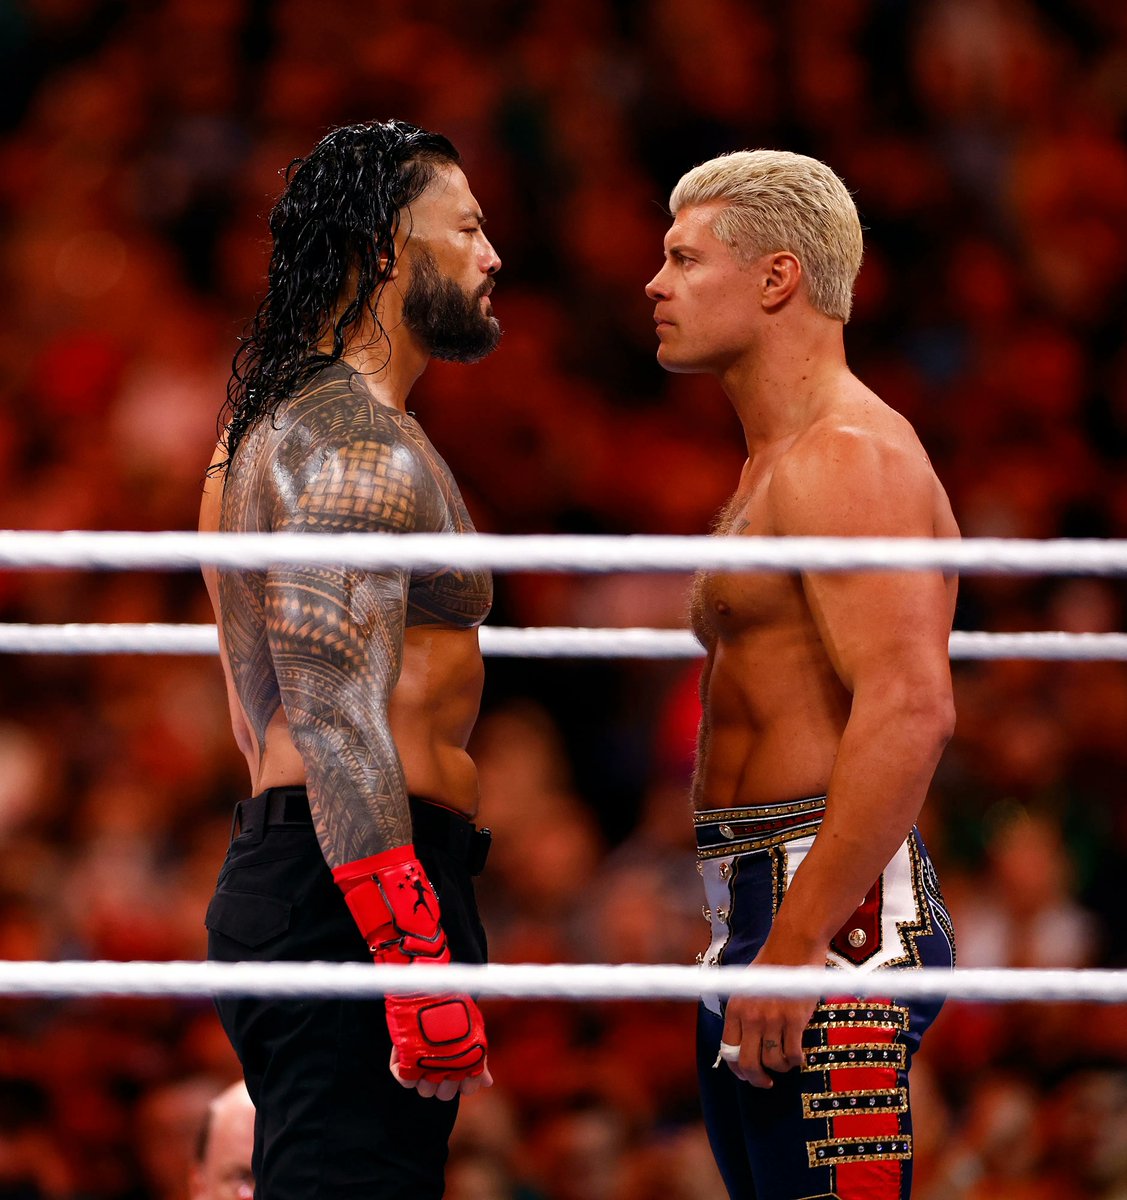 Roman Reigns and Paul Heyman convinced both Vince McMahon and Triple H last year to change the WrestleMania 39 finish. 

Reigns & Heyman believed it would be more beneficial in getting people like Jey Uso and Solo Sikoa over, and would make Rhodes a bigger star to hold off the…